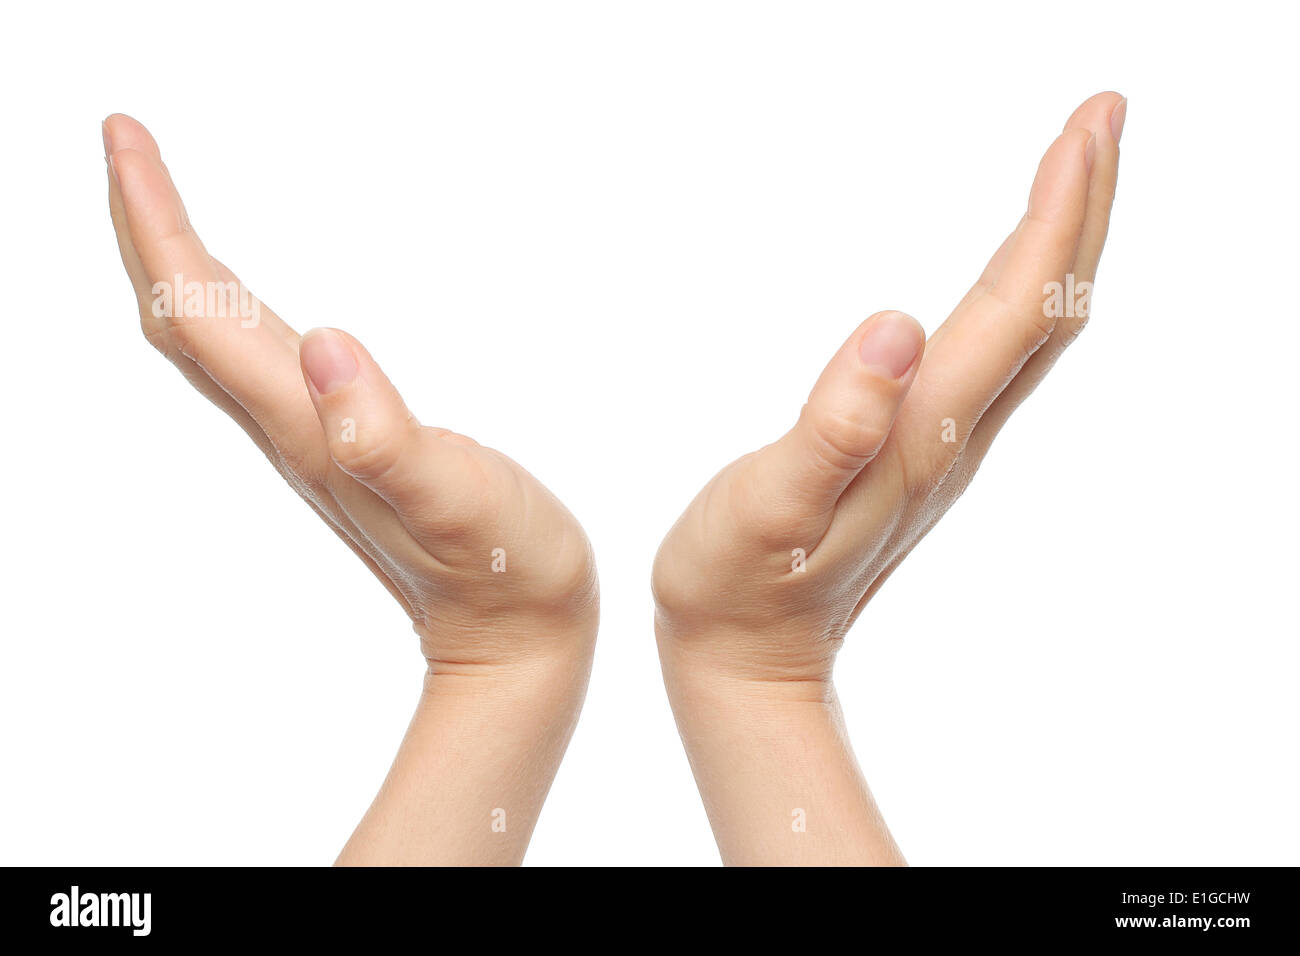 Two open woman hands on white background Stock Photo